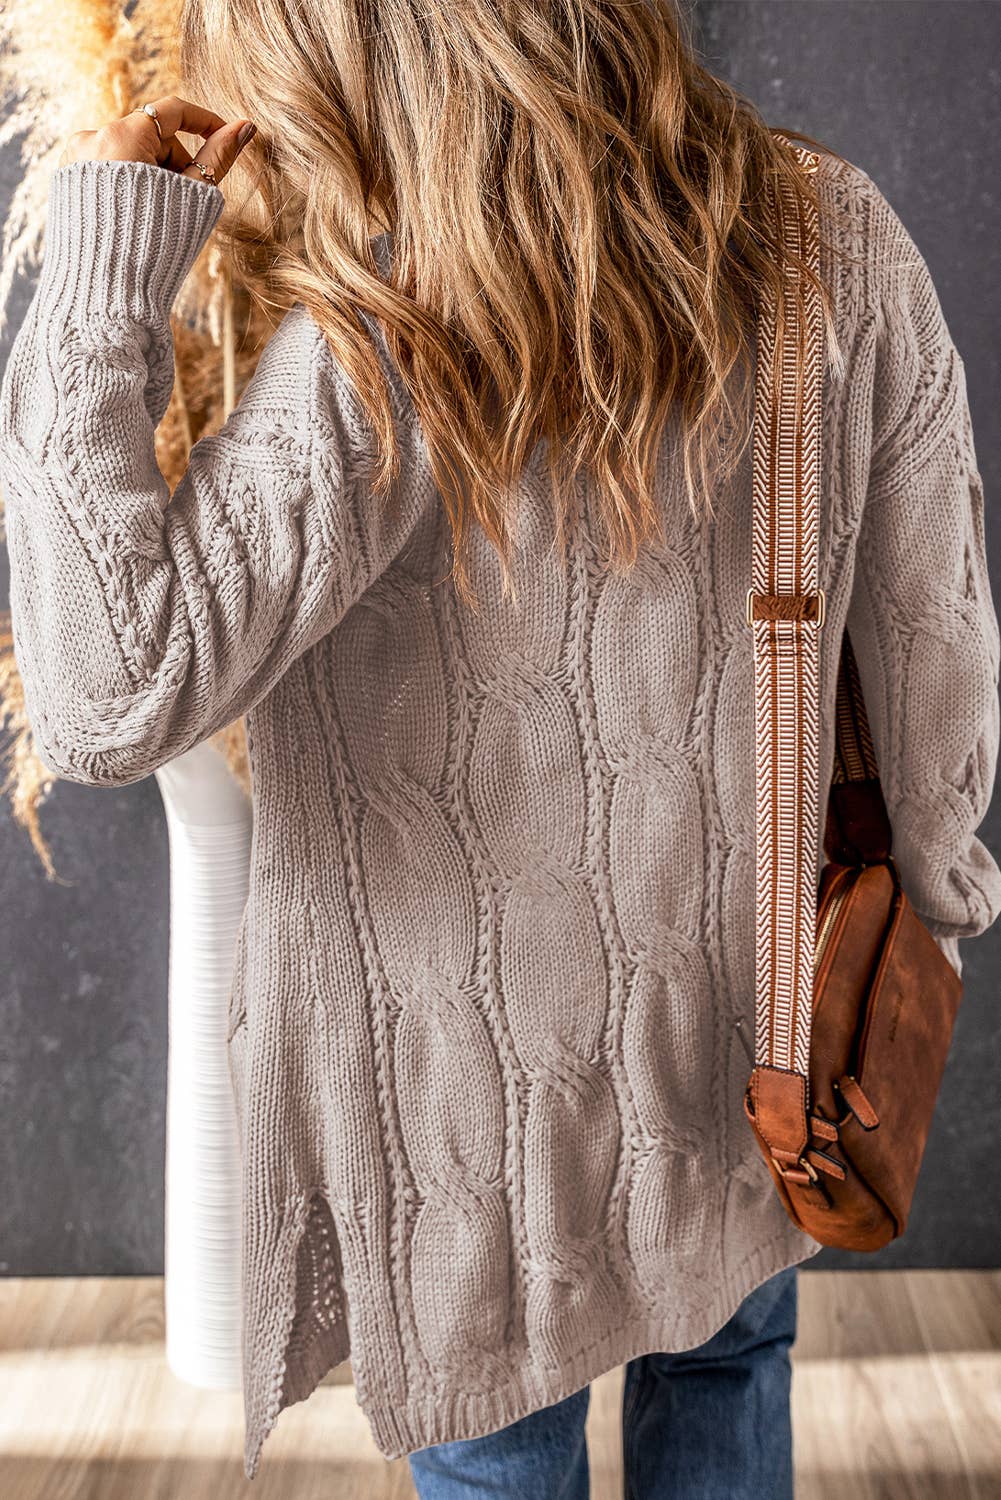 Textured Eyelet Ribbed Cable Knit Cardigan - Apricot